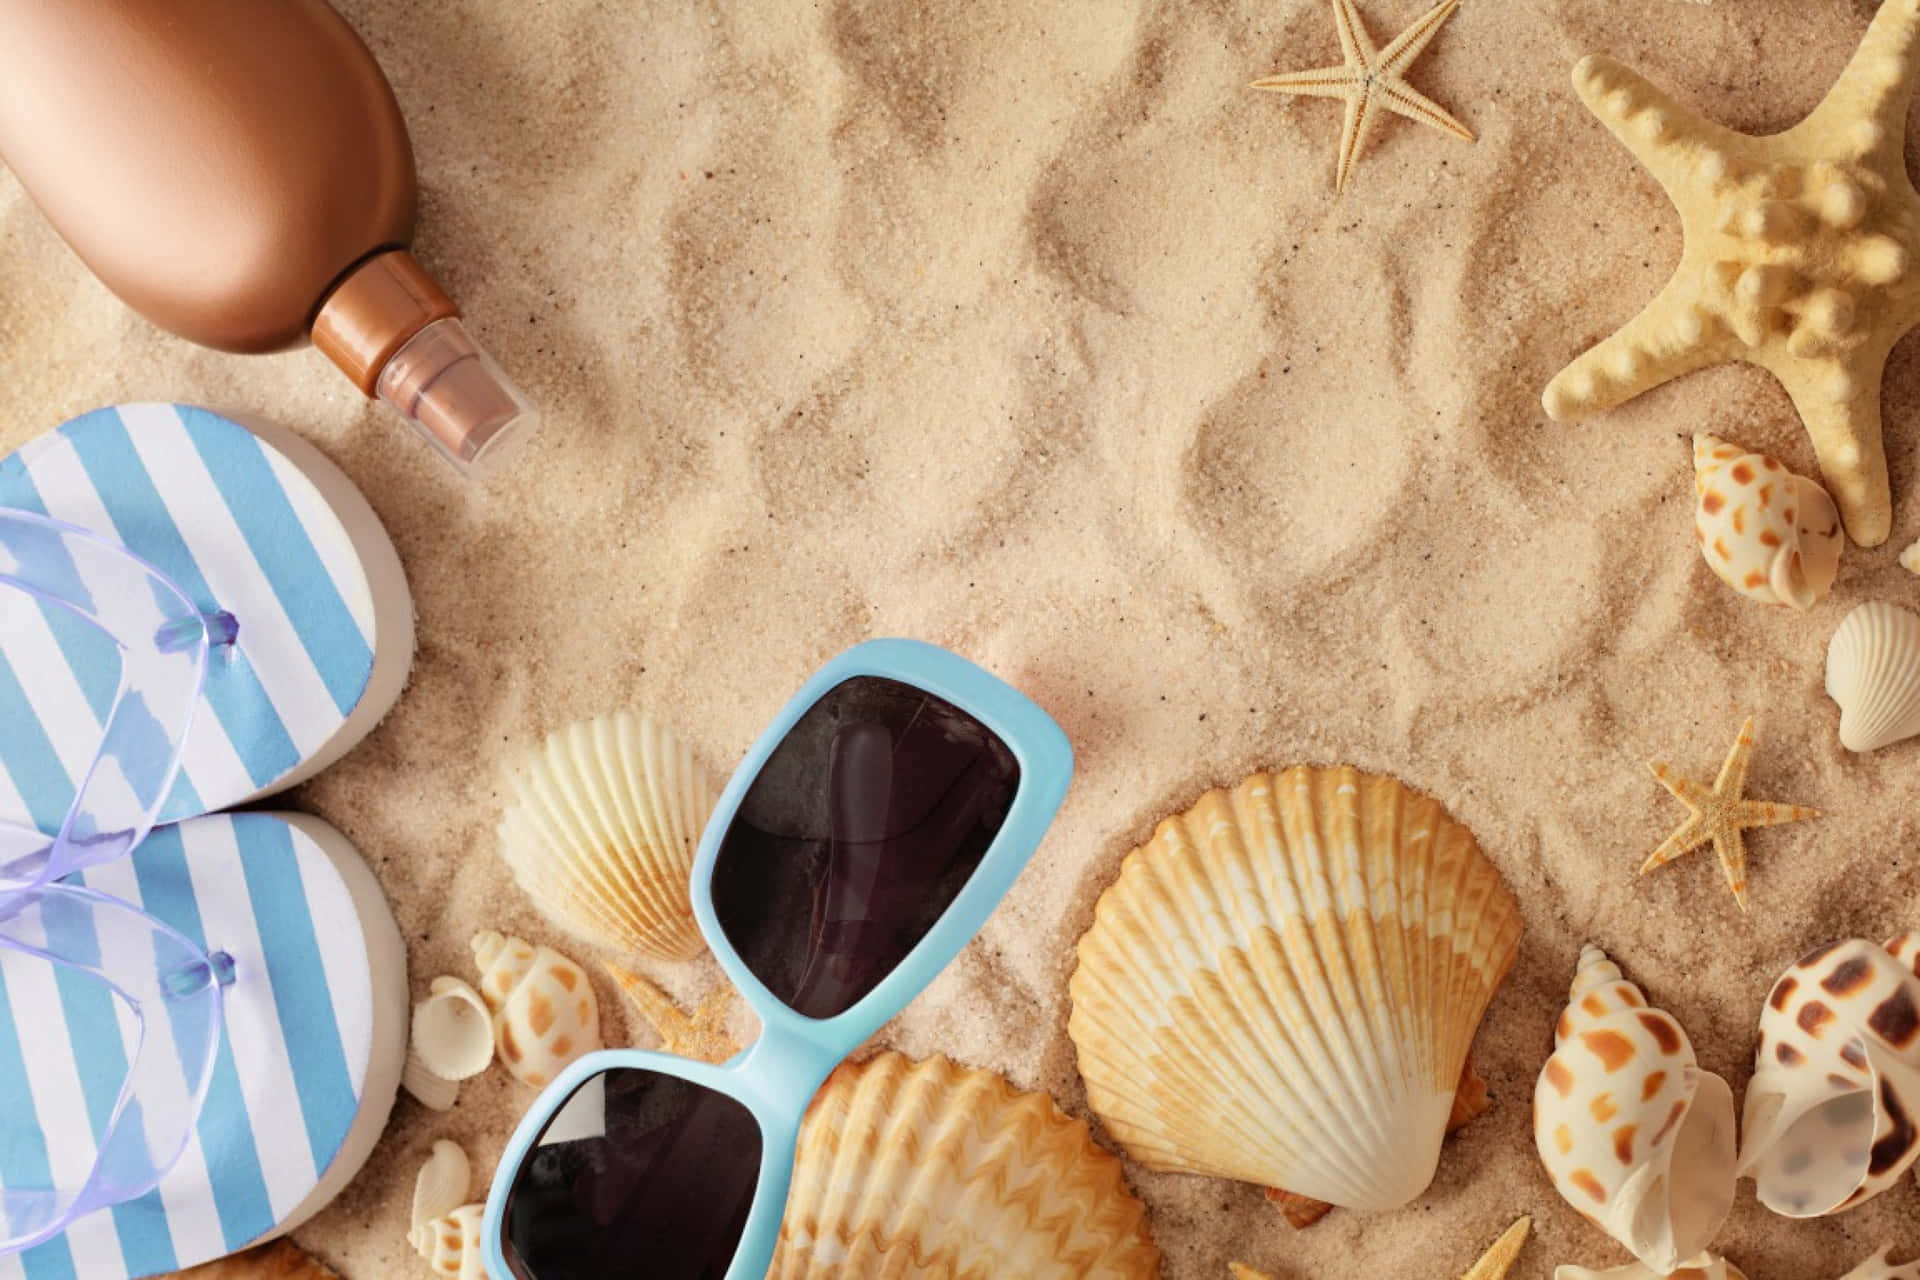 Fun and colorful beach accessories for a perfect day at the shore. Wallpaper